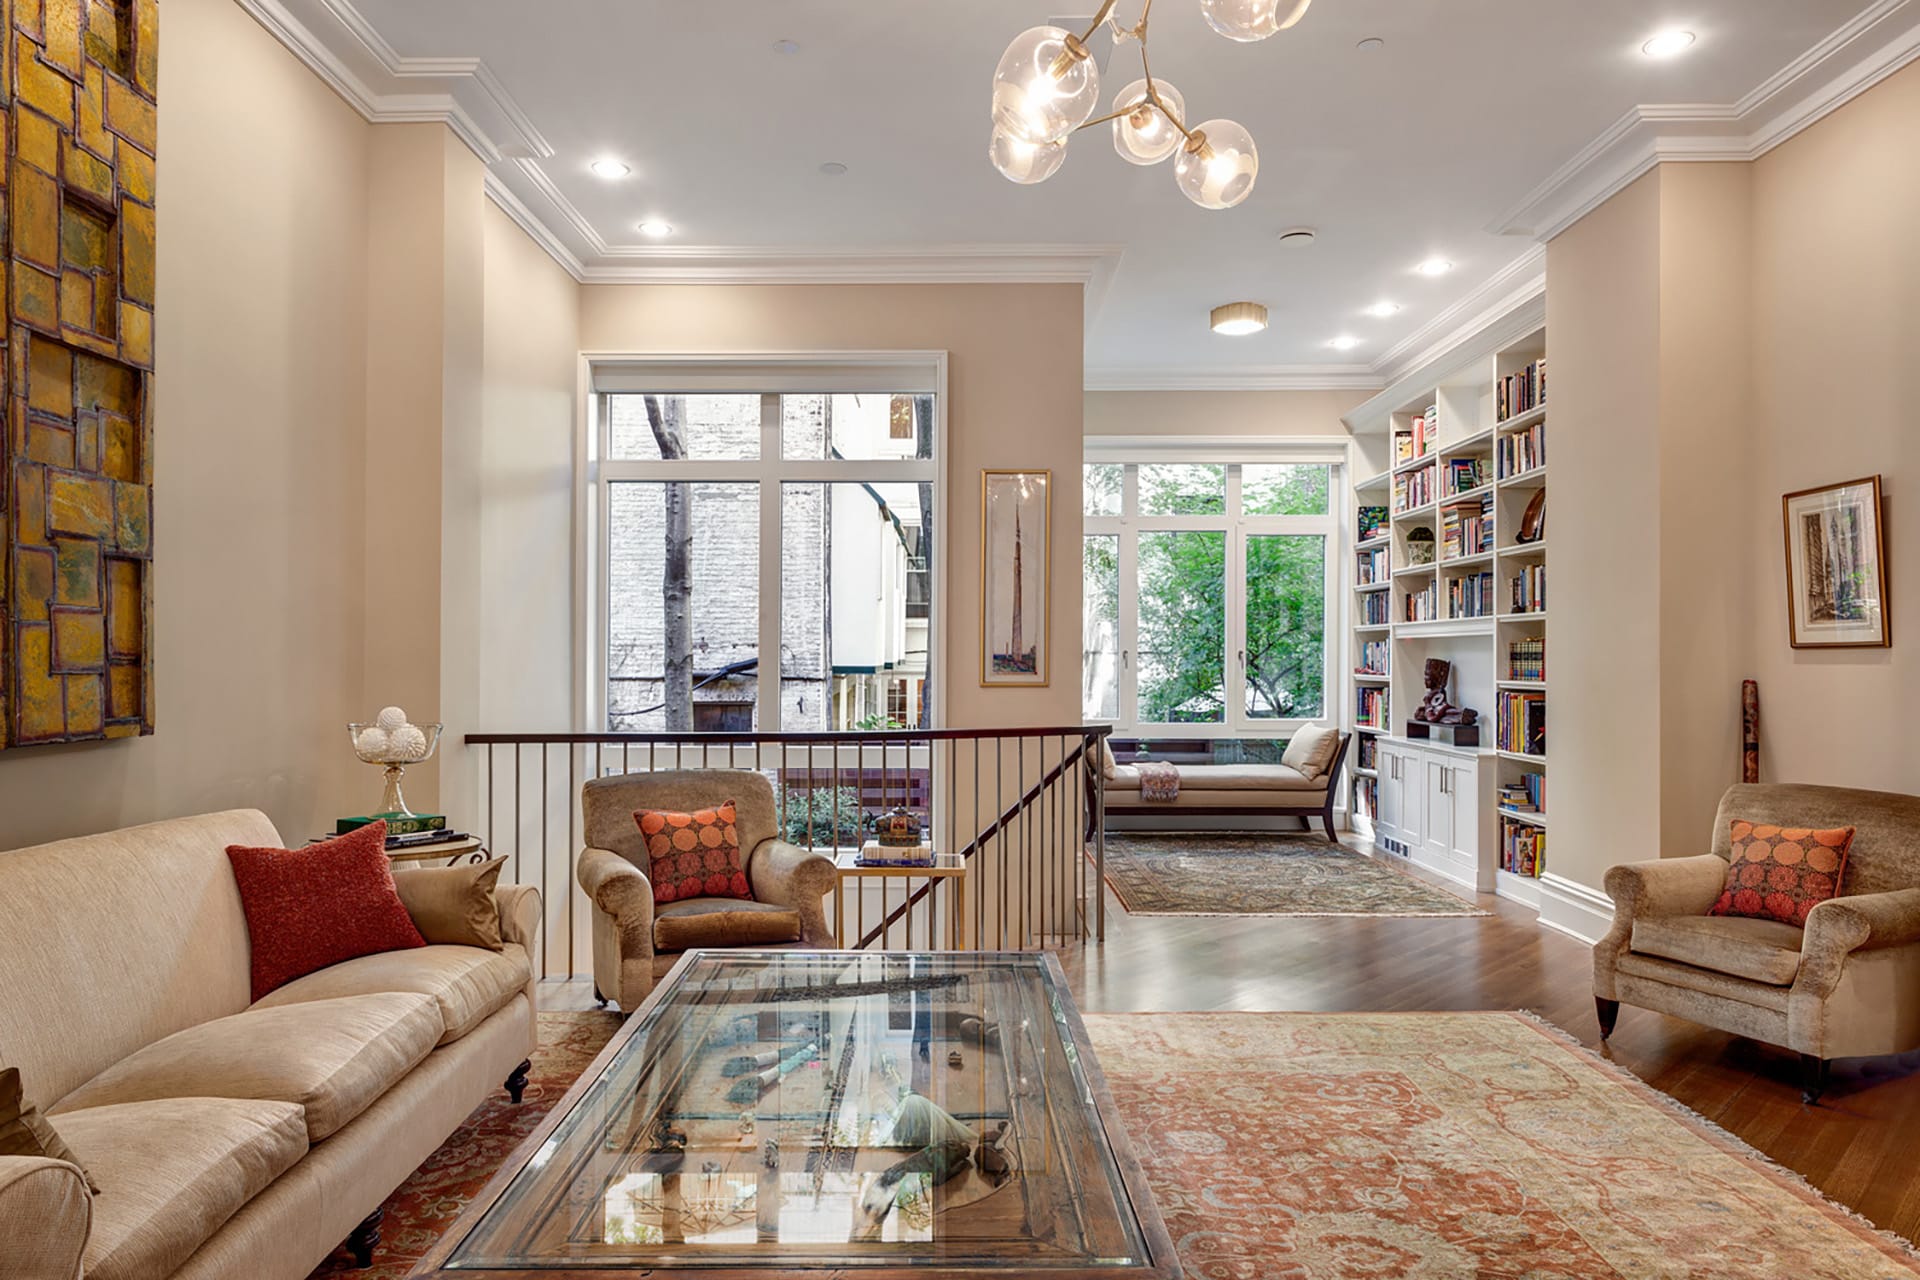 Living space with two separate seating areas, a coffee table that doubles as a display case, and antique rugs.